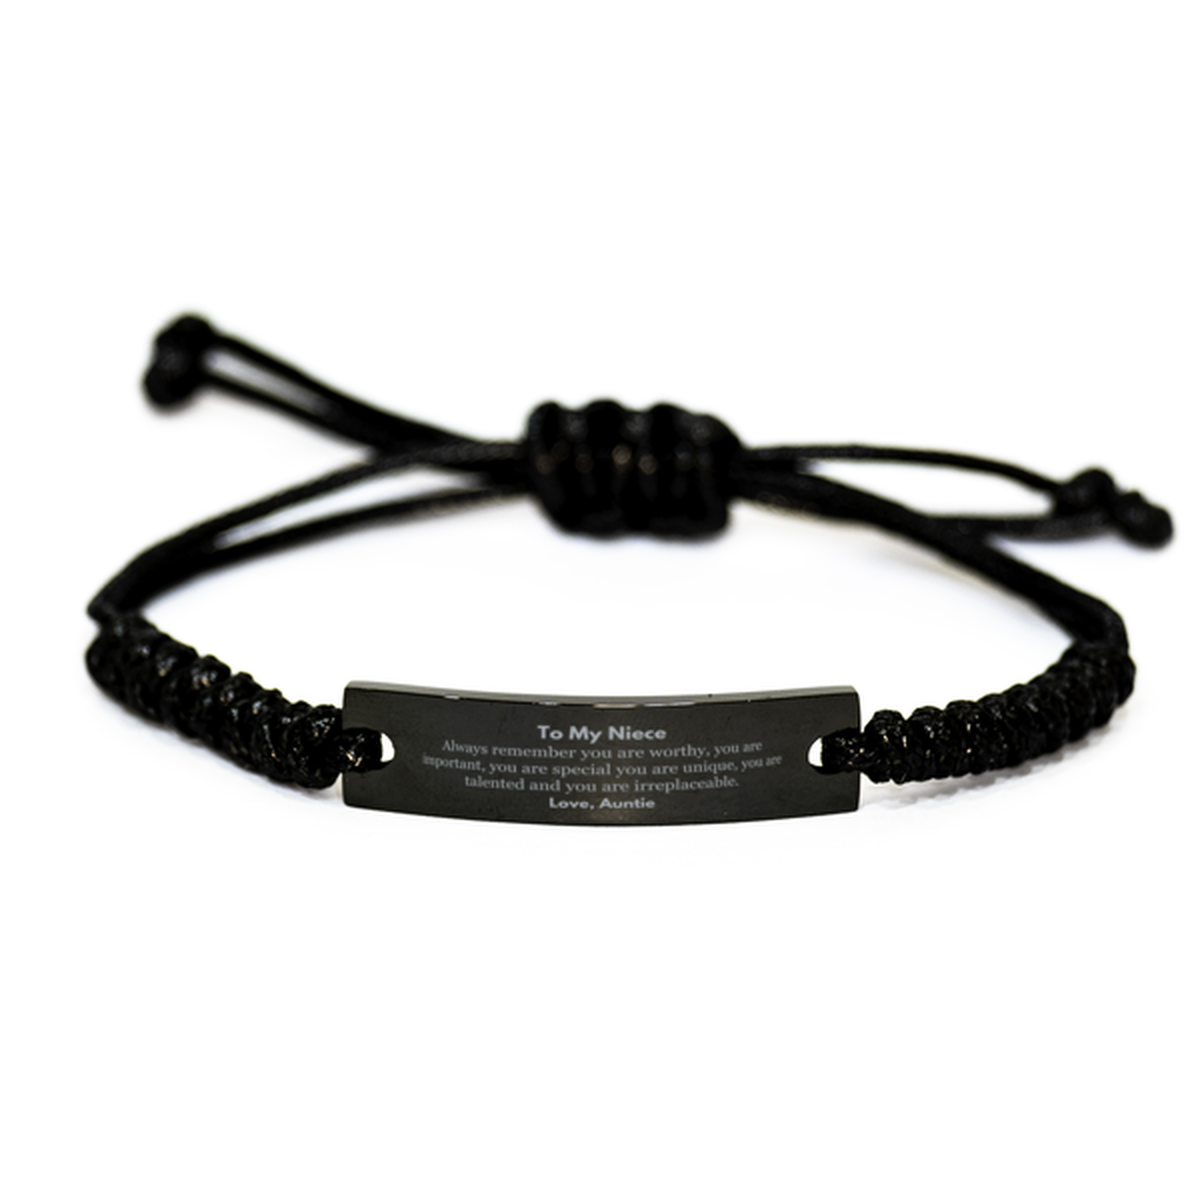 Niece Birthday Gifts from Auntie, Inspirational Black Rope Bracelet for Niece Christmas Graduation Gifts for Niece Always remember you are worthy, you are important. Love, Auntie